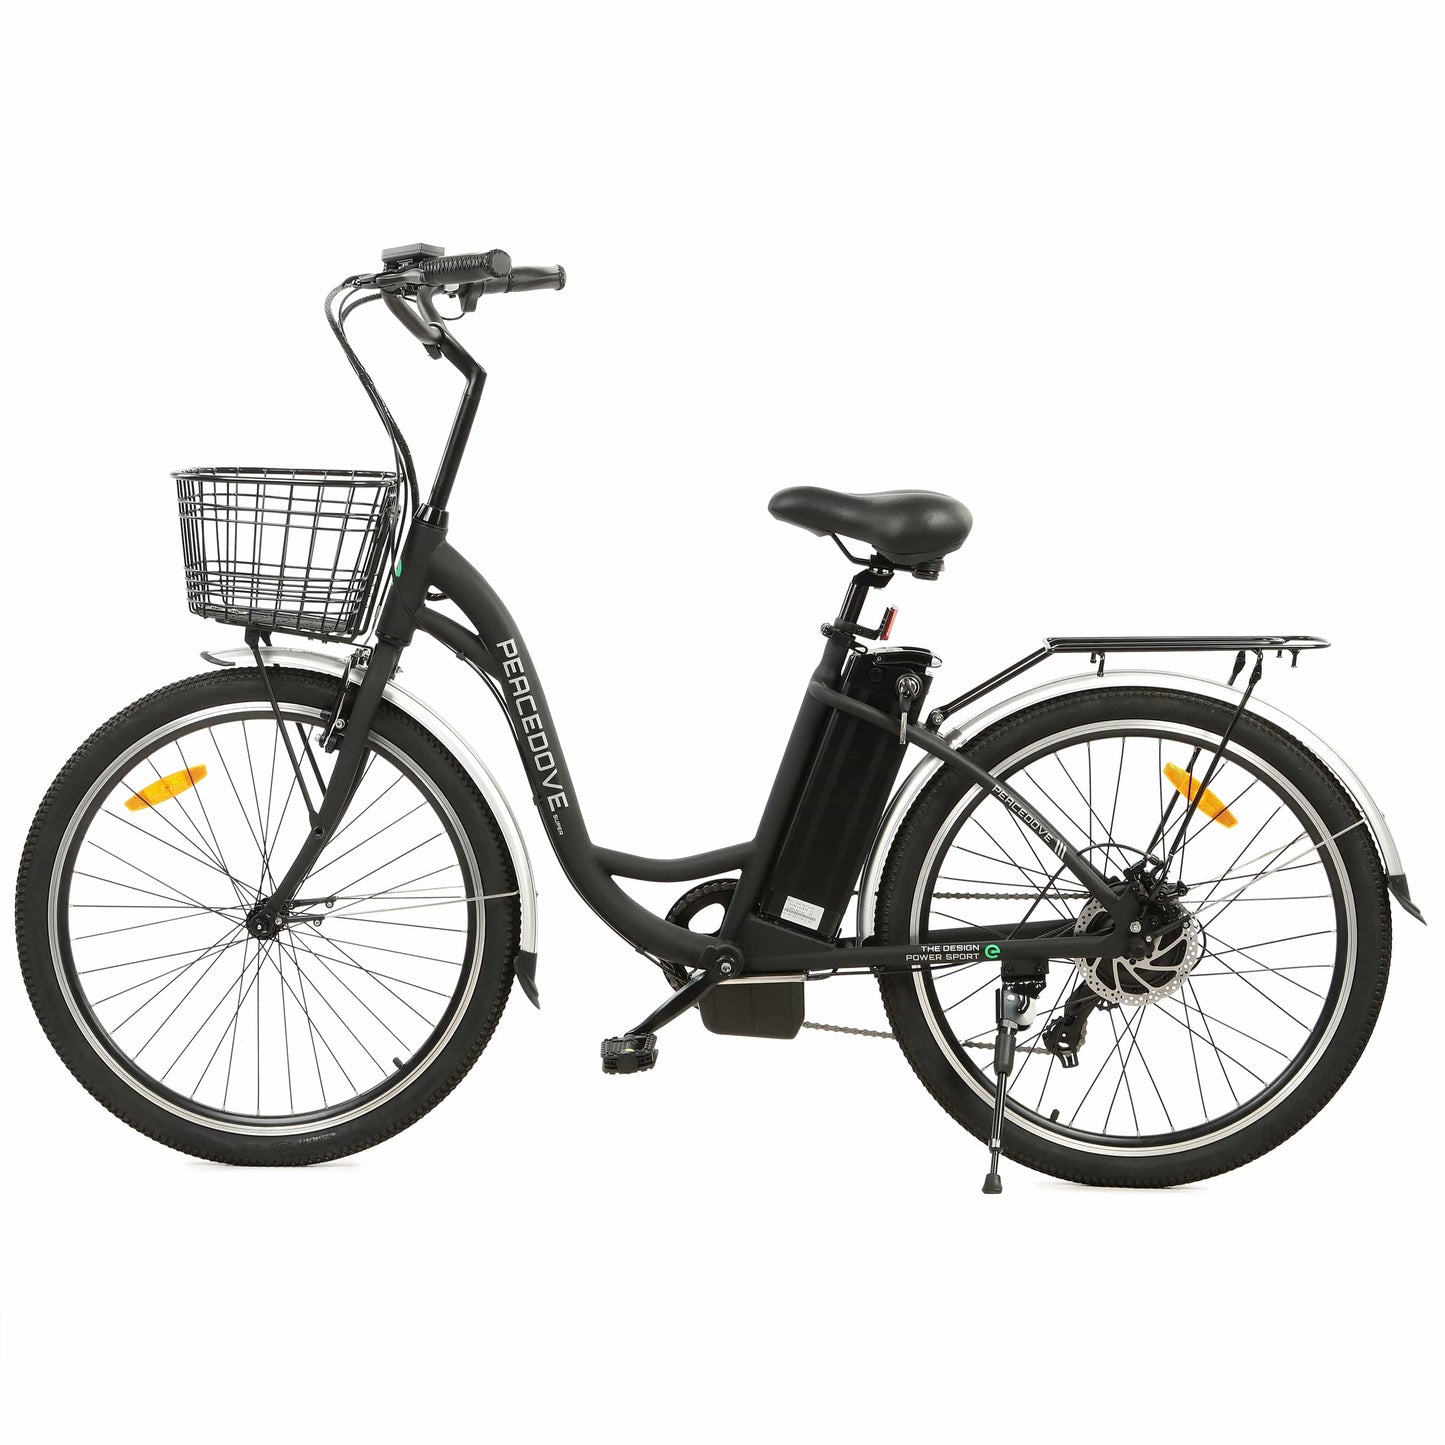 Ecotric ebikes Black Ecotric Peacedove 26" electric city bike with basket and rear rack